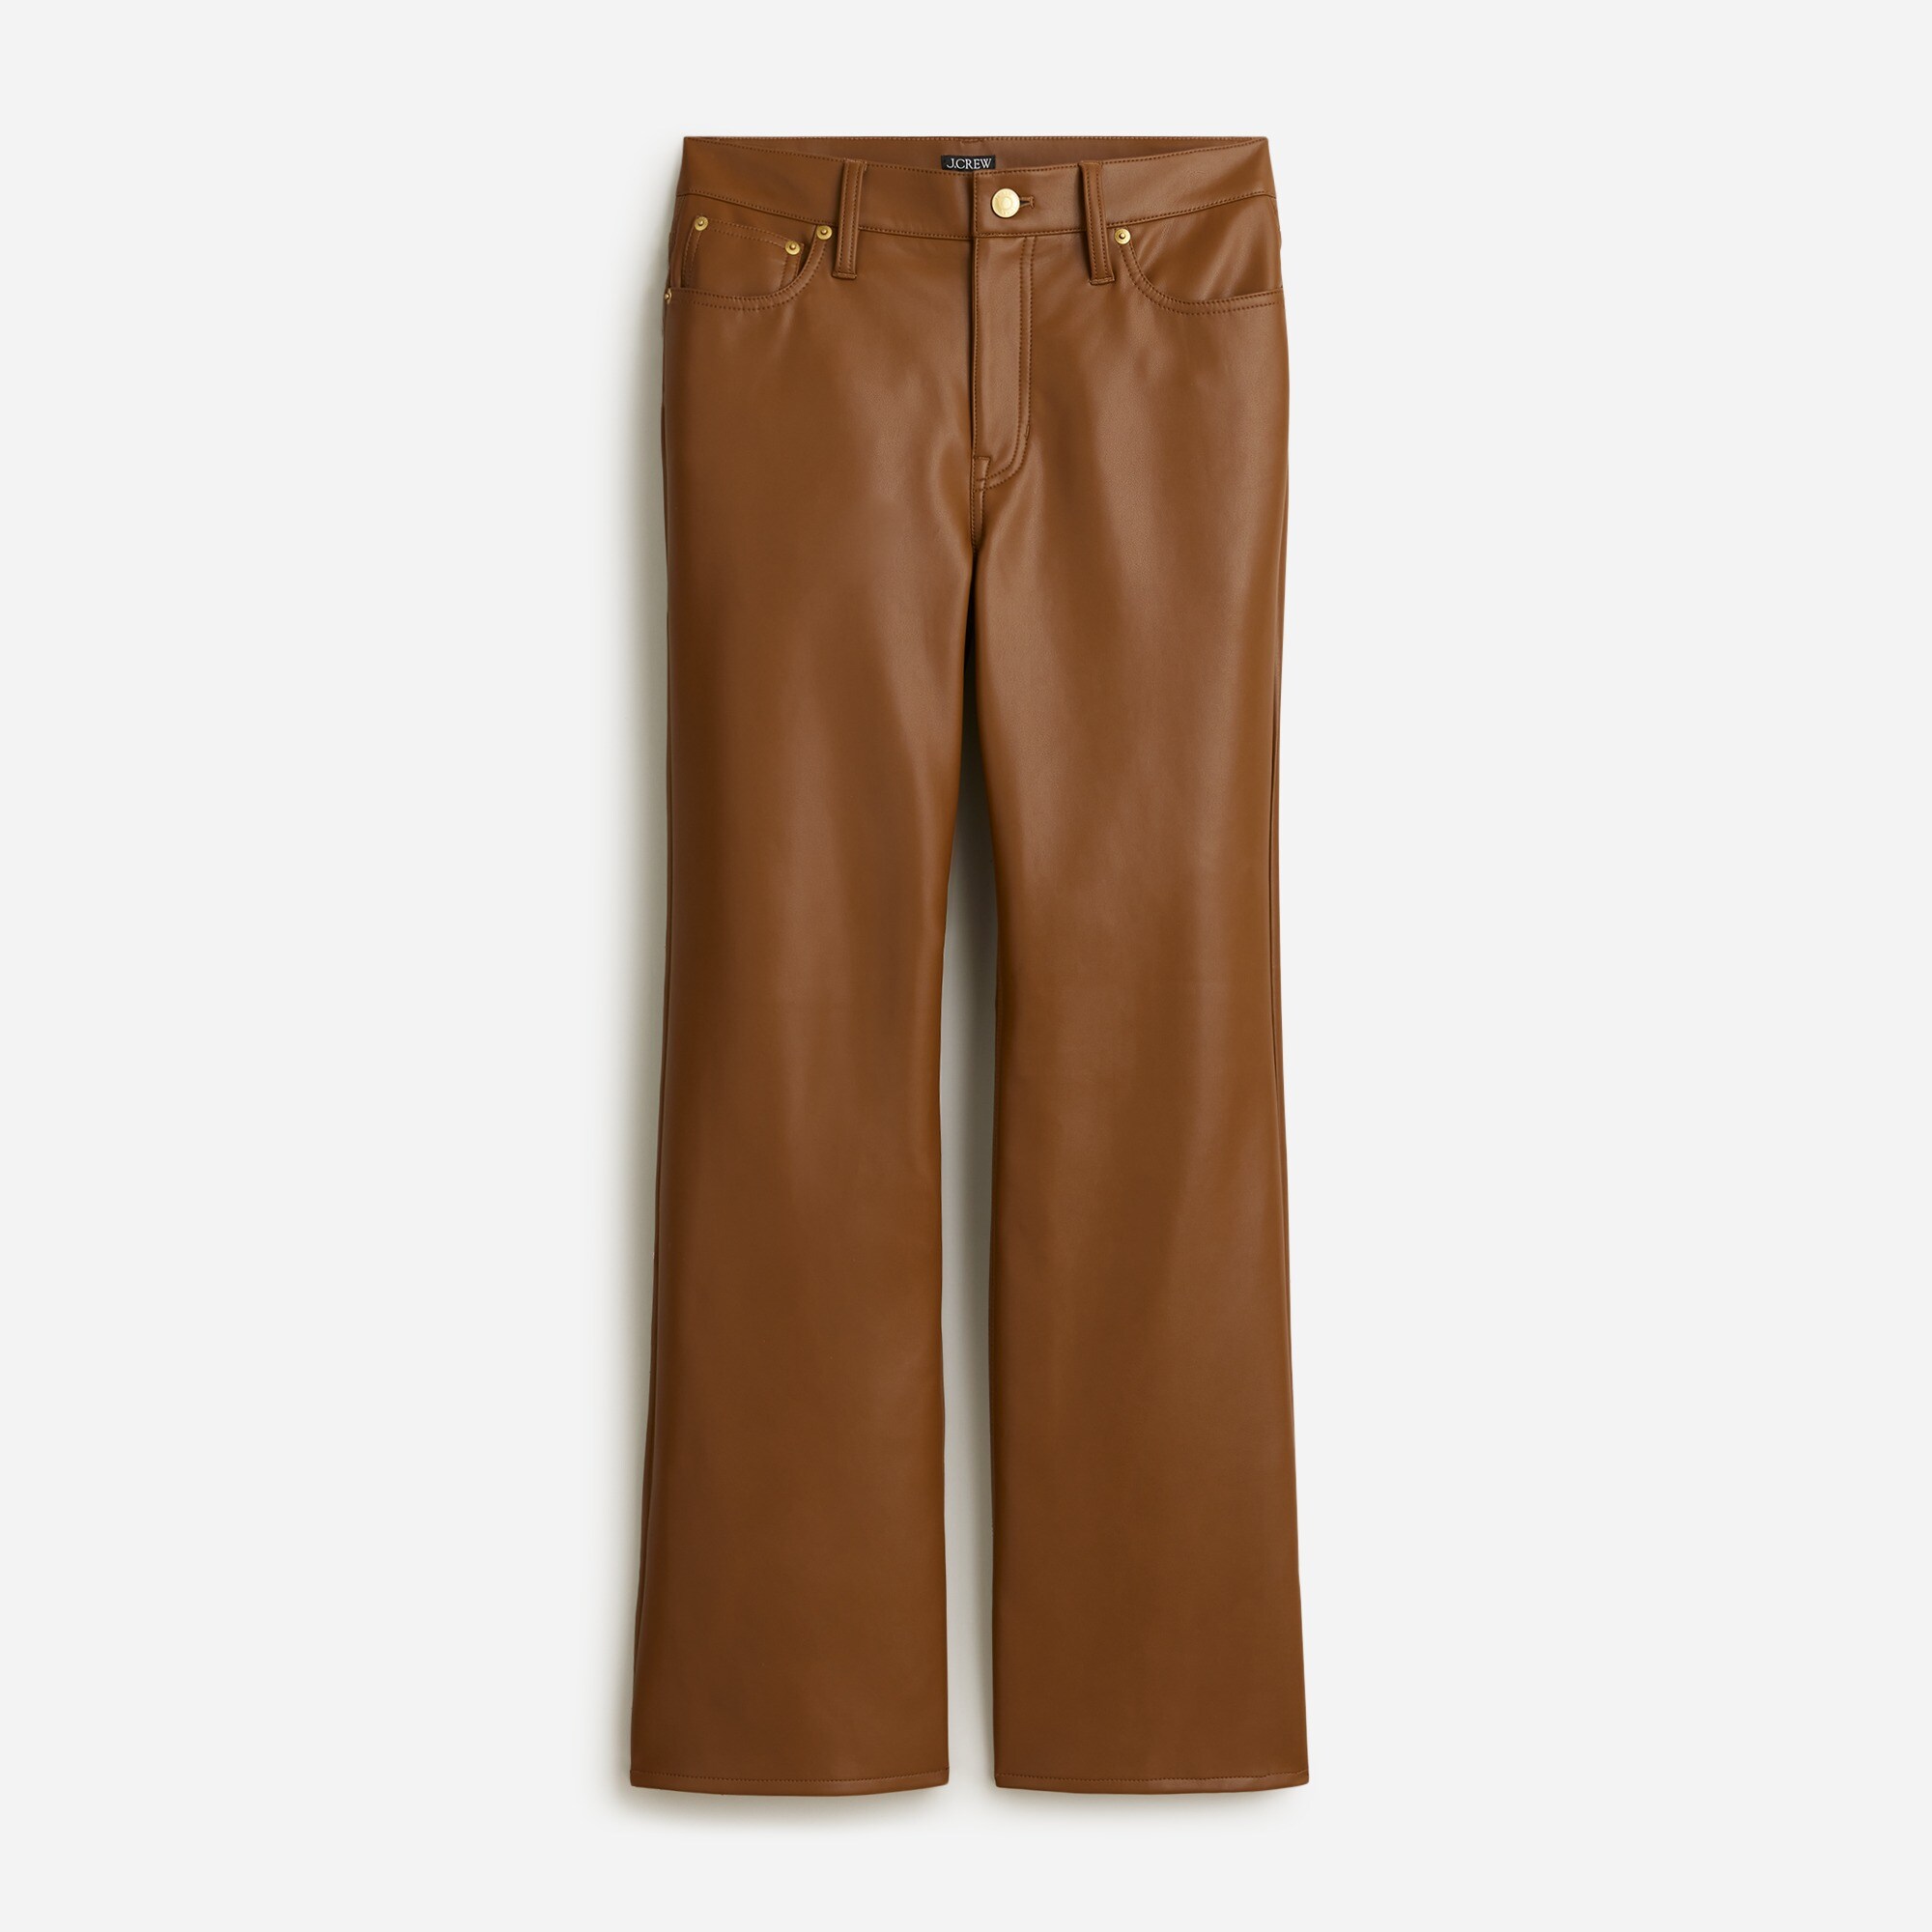  Slim wide-leg pant in faux leather